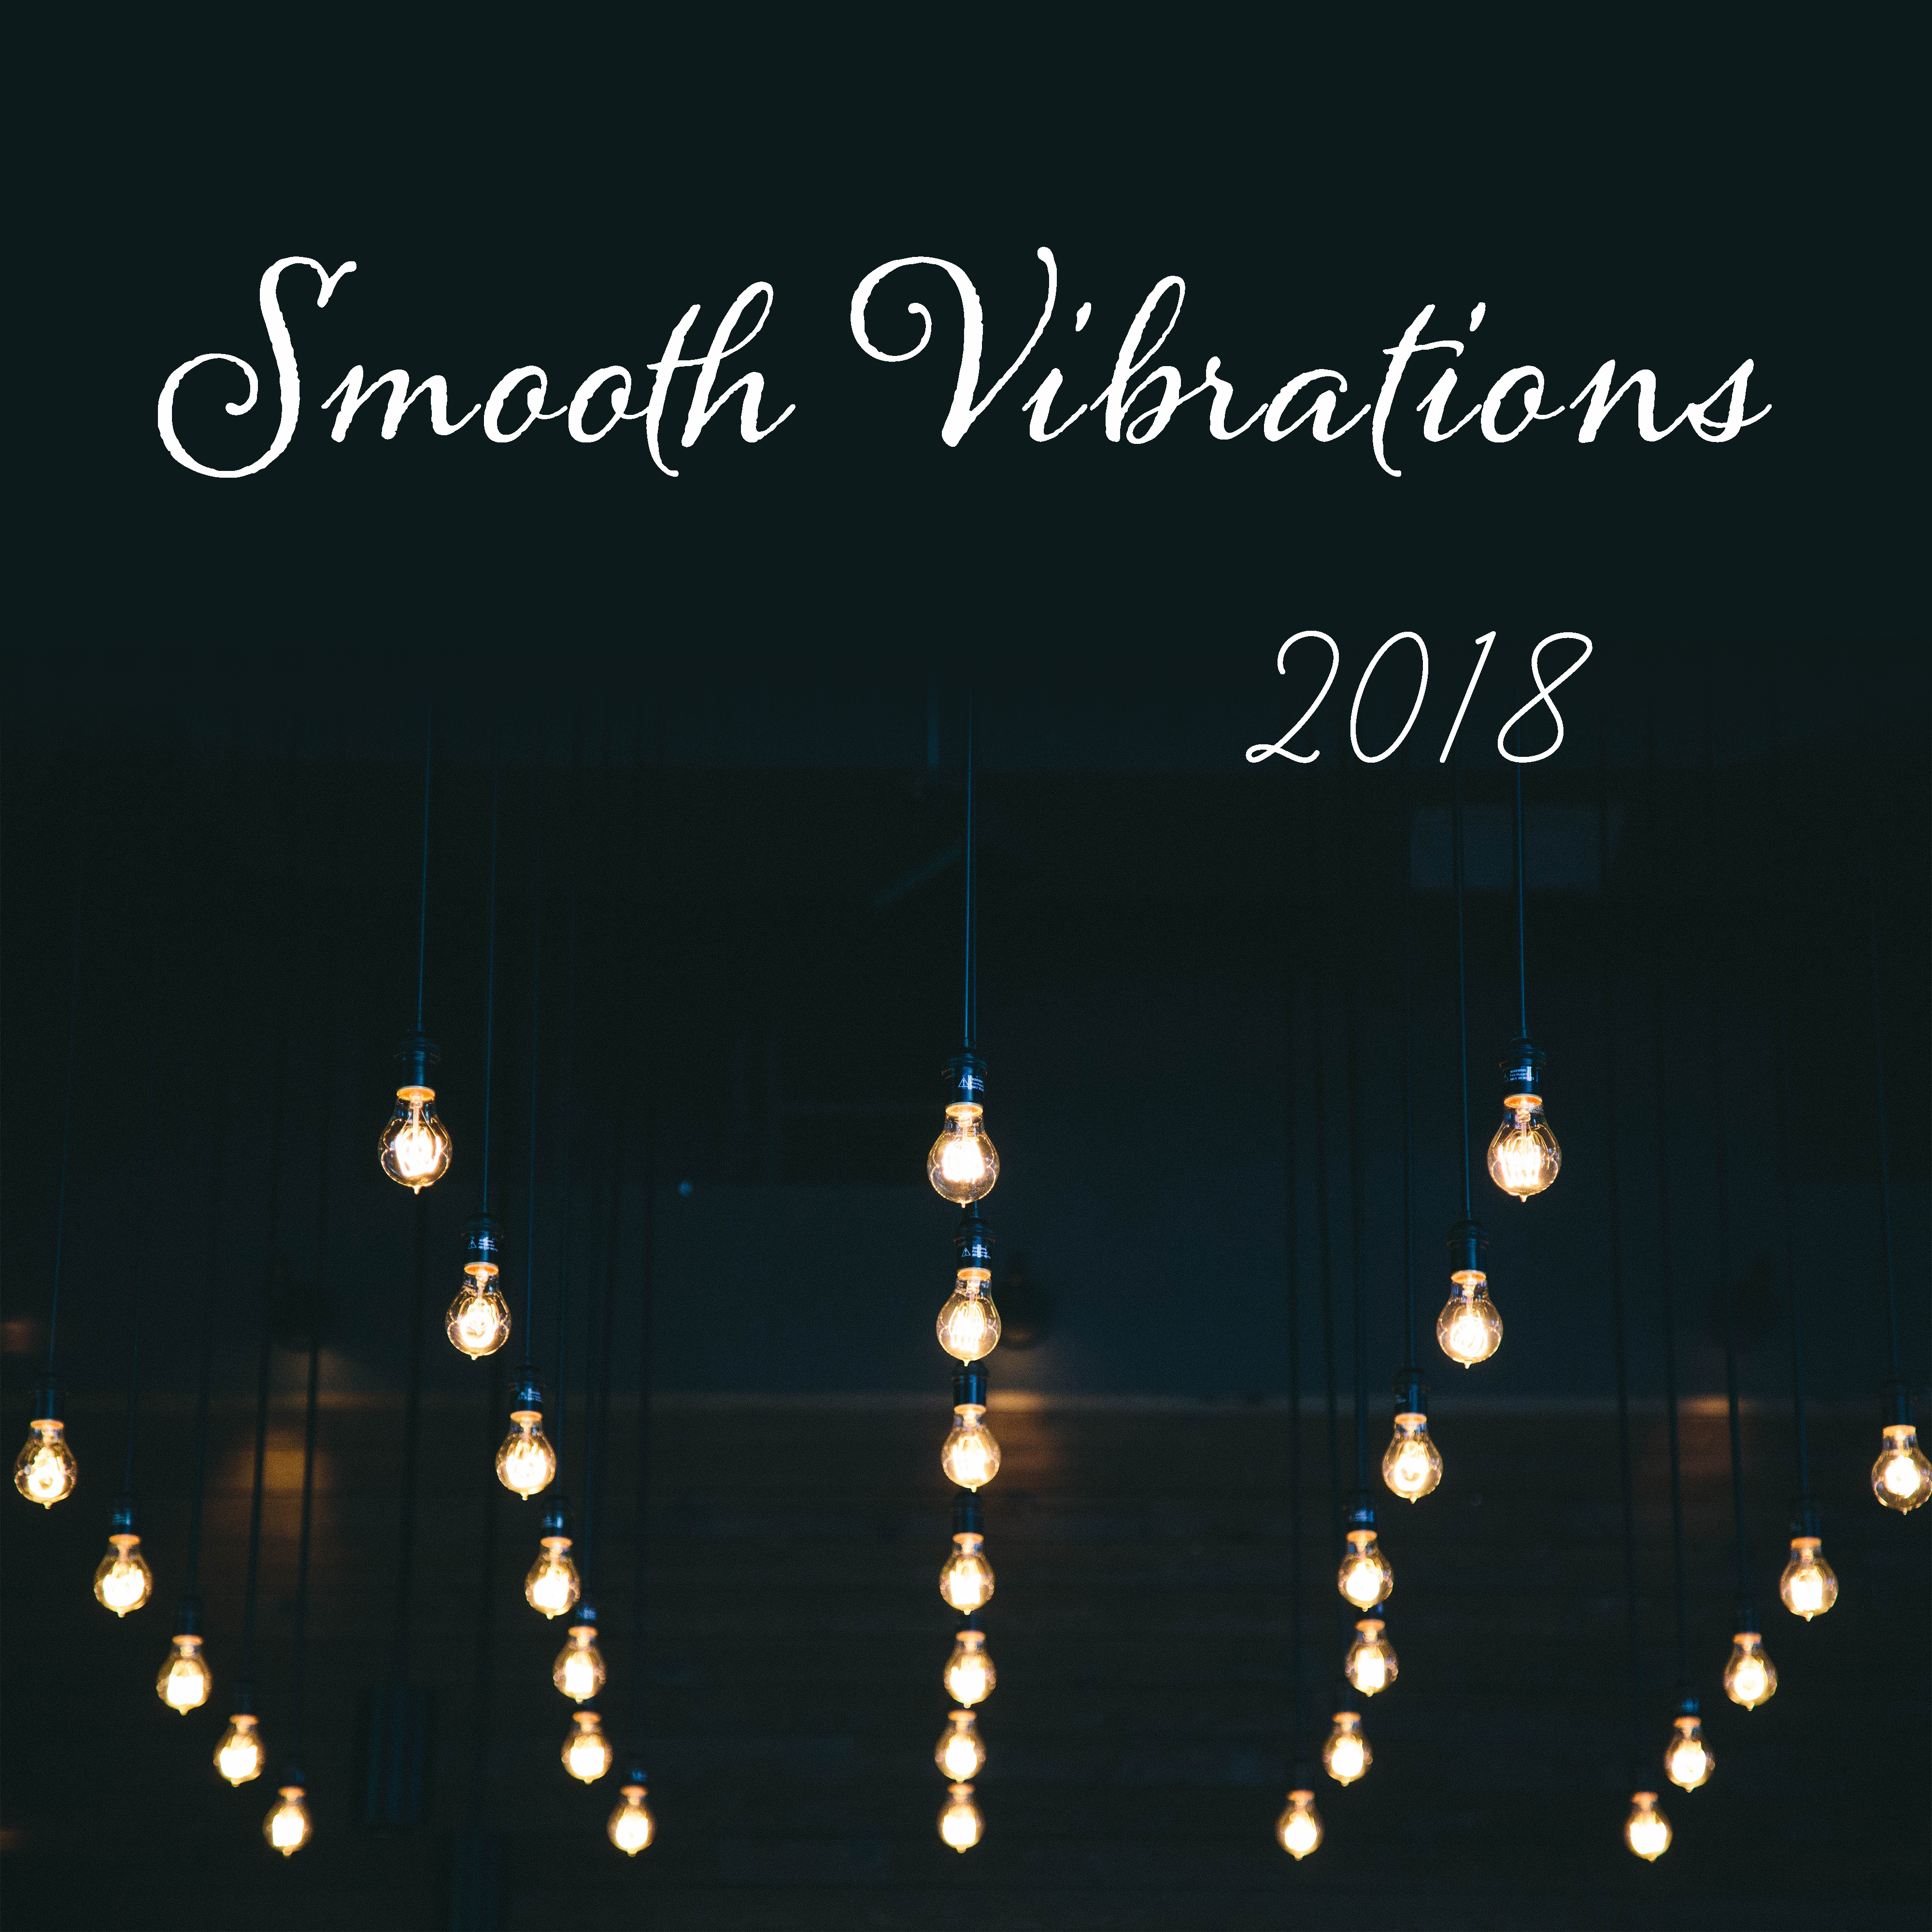 Smooth Vibrations 2018